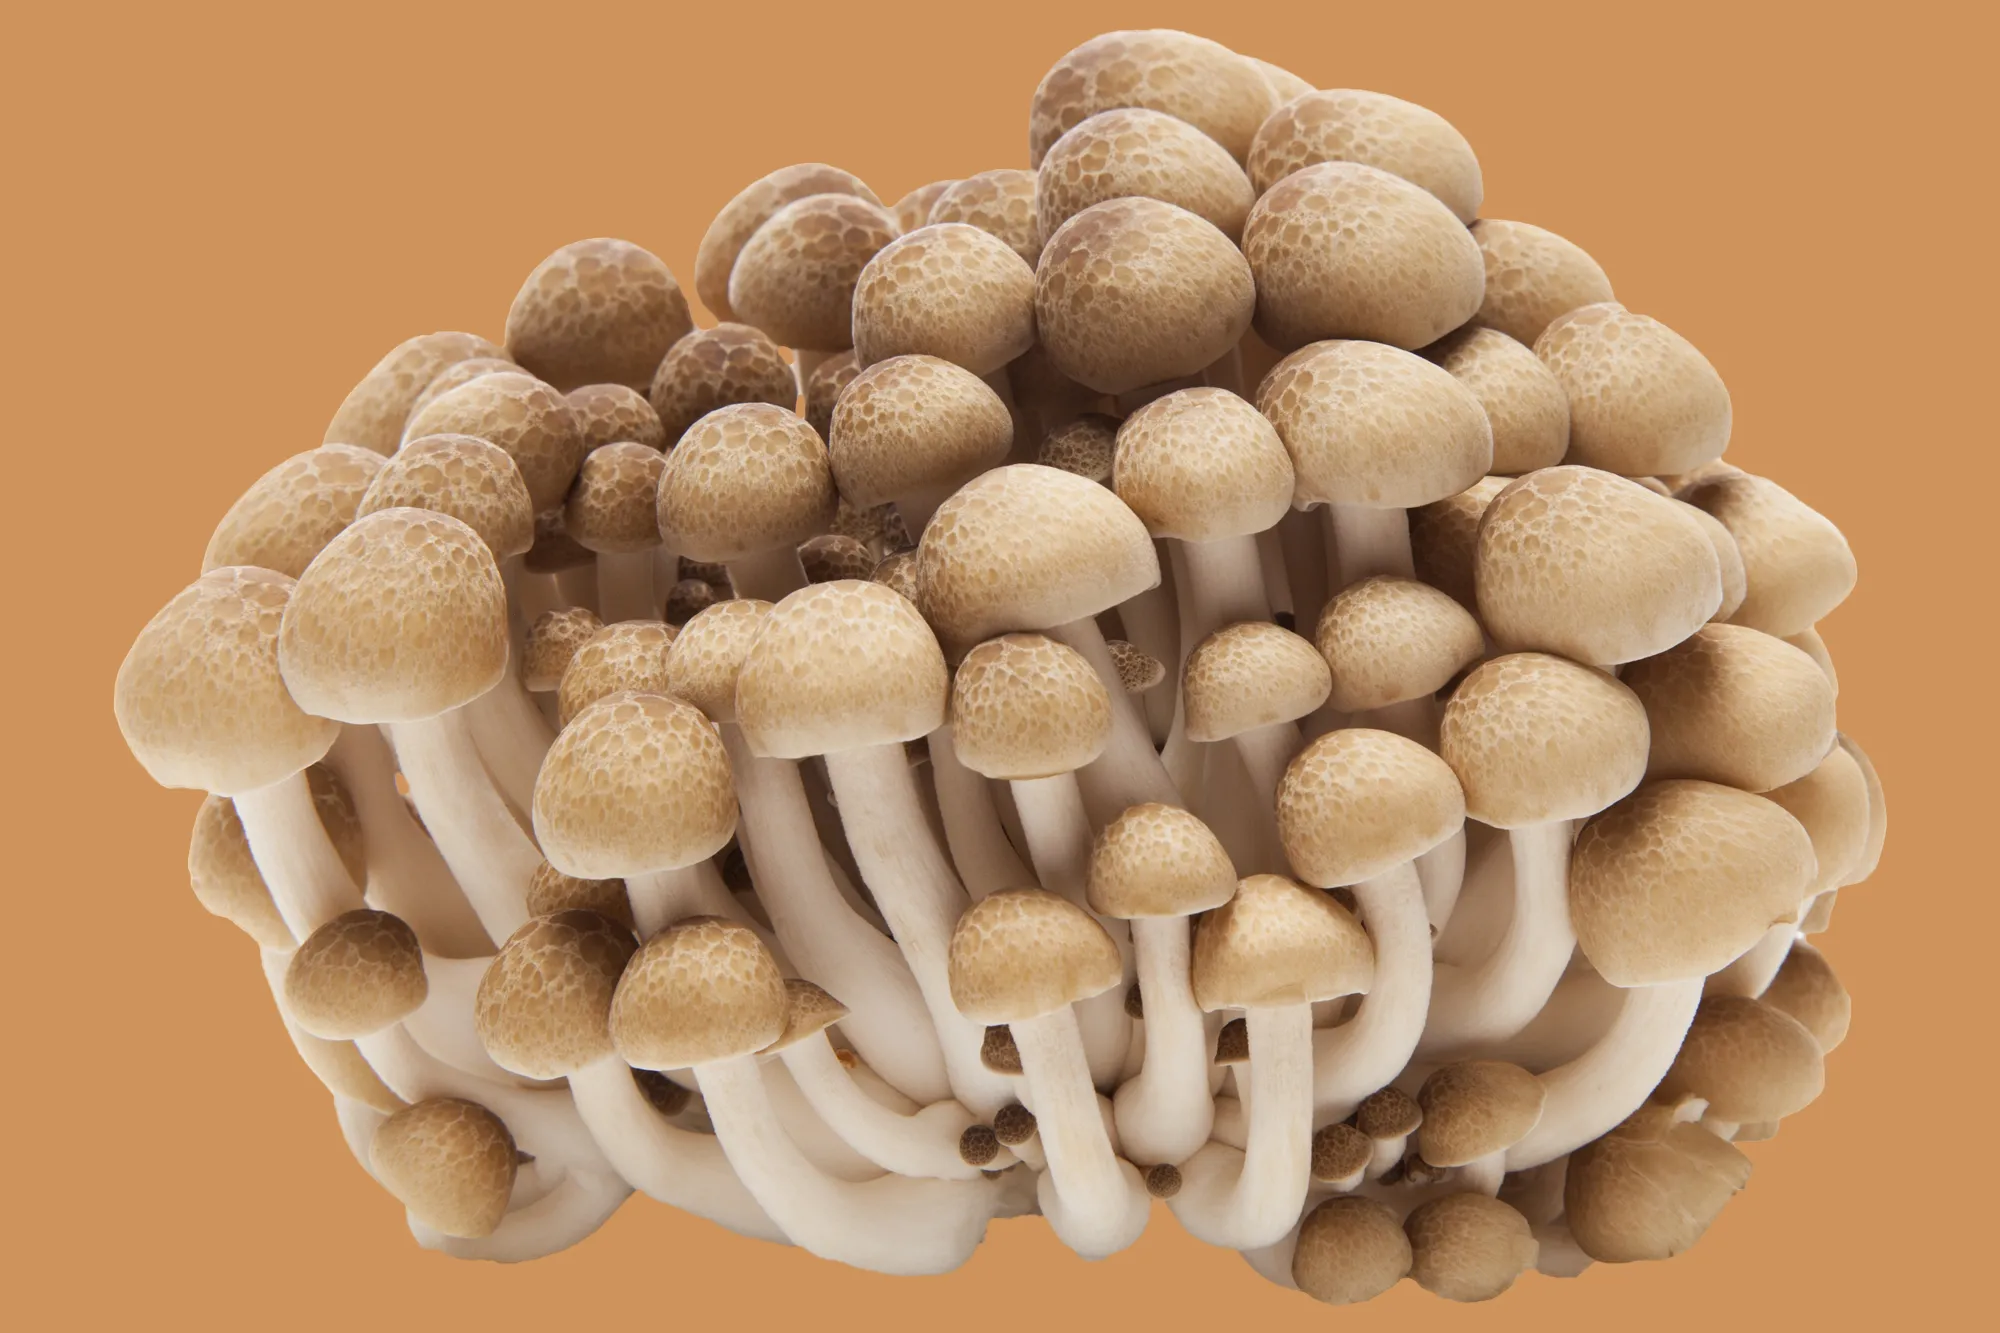 Benefits of mushrooms and mushrooms for your health